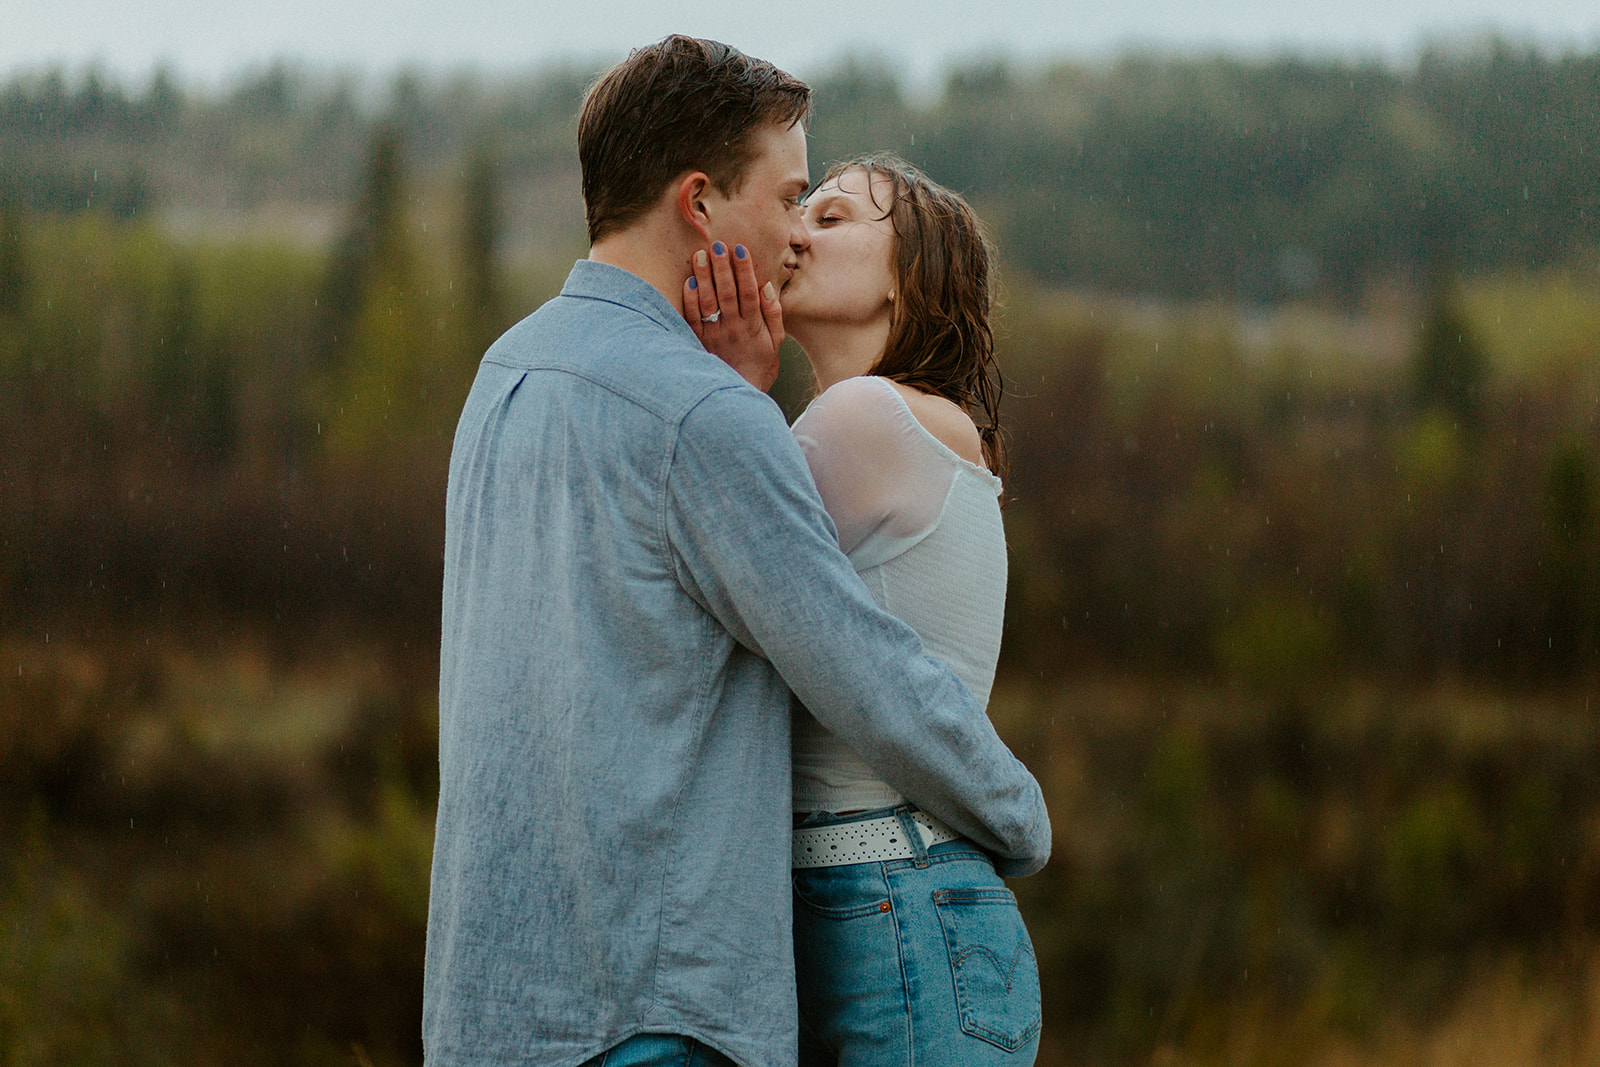 Romantic rainy day kiss with Notebook vibes